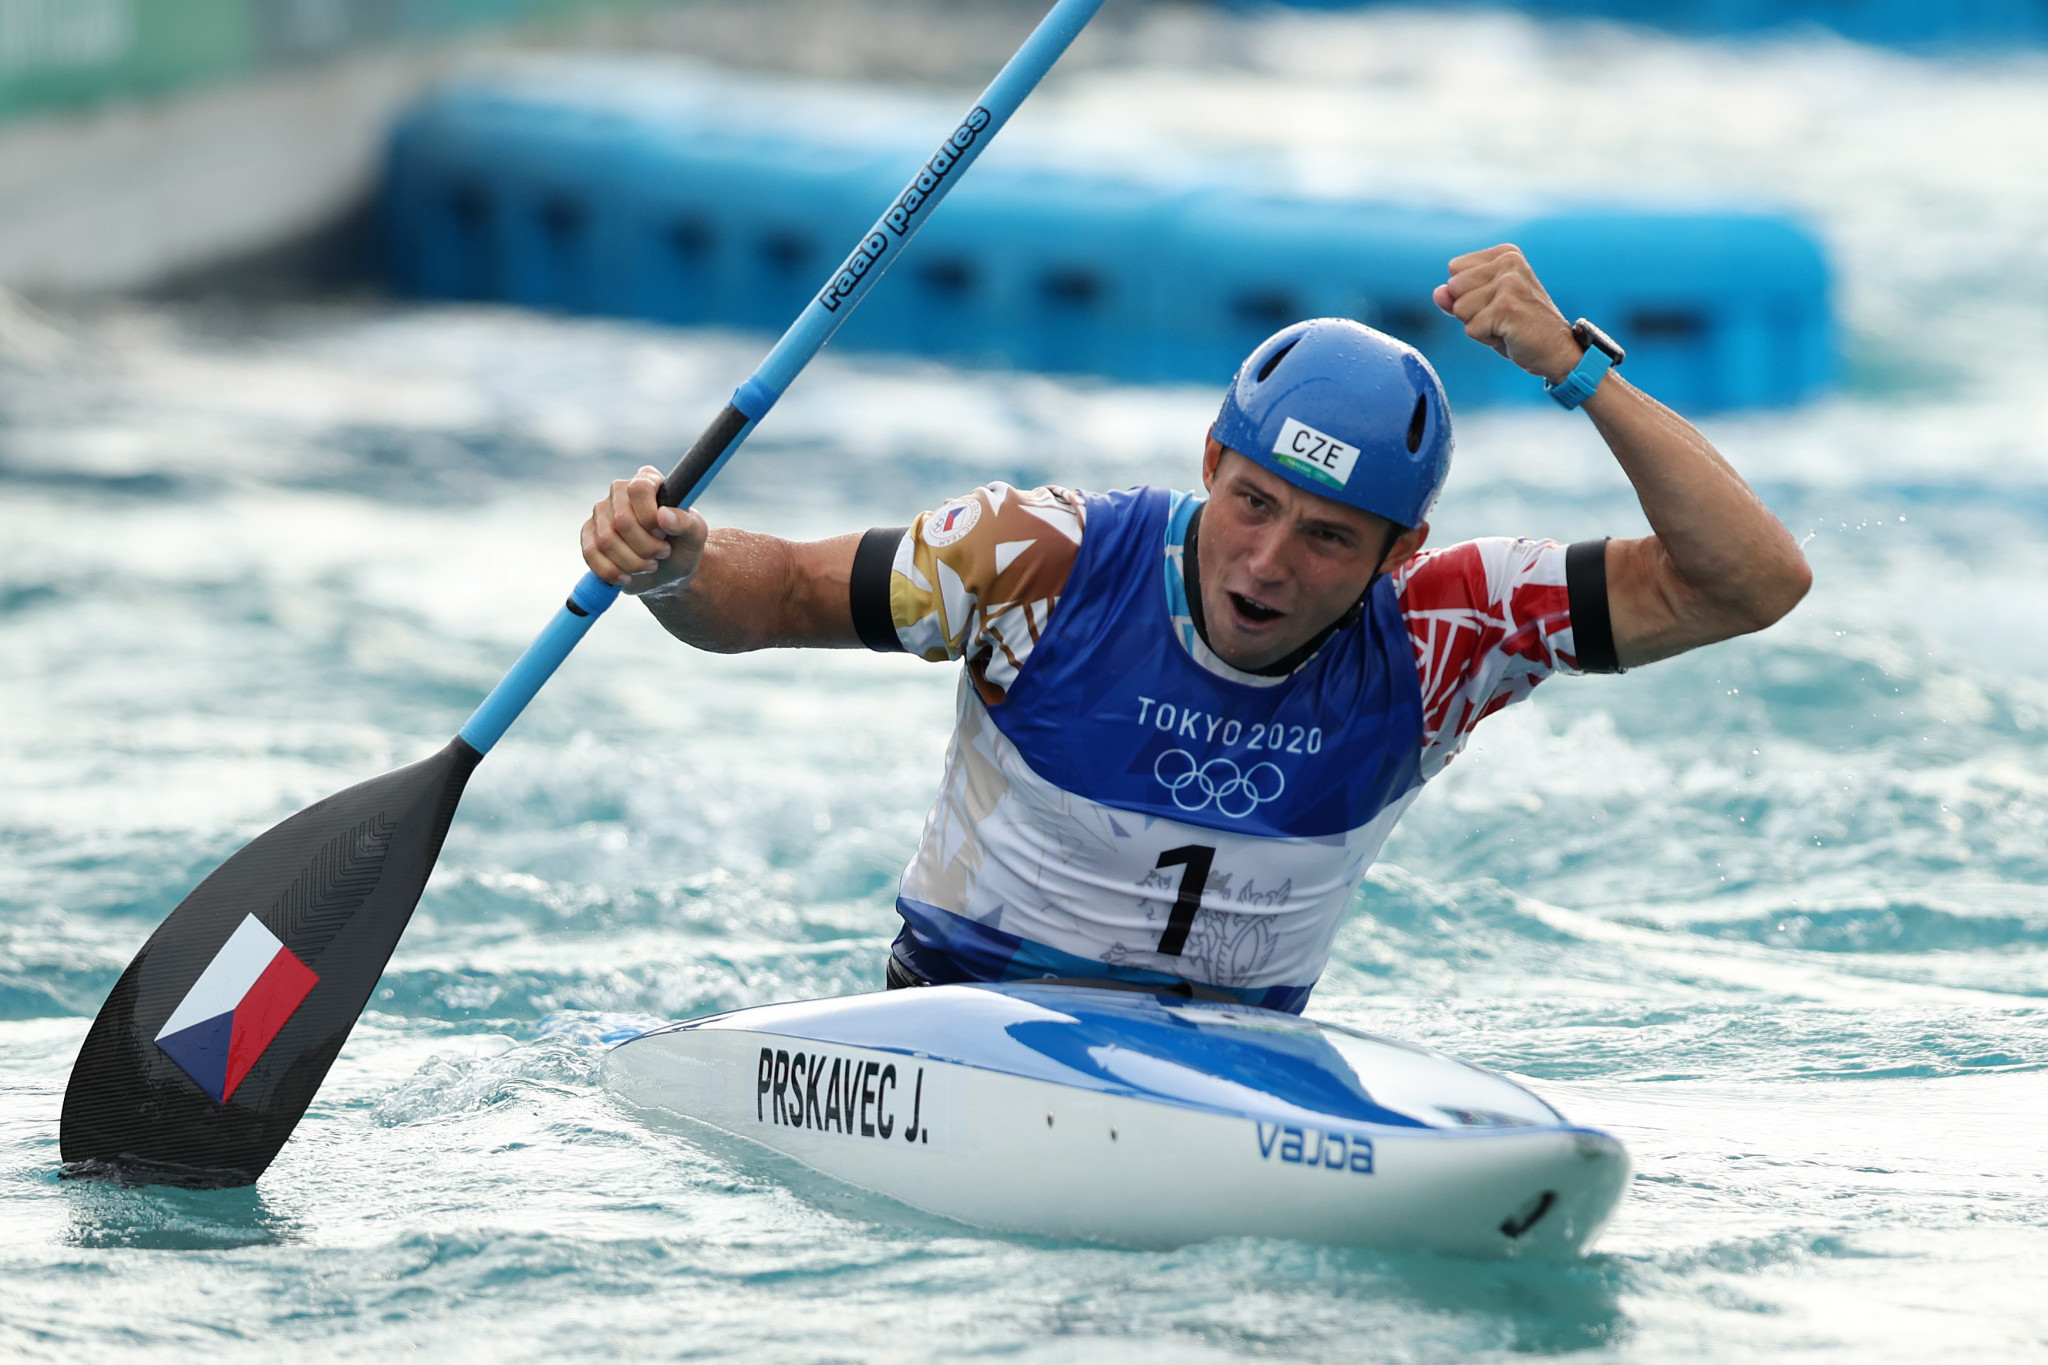 Prskavec puts Rio 2016 disappointment behind him with K1 gold at Tokyo 2020